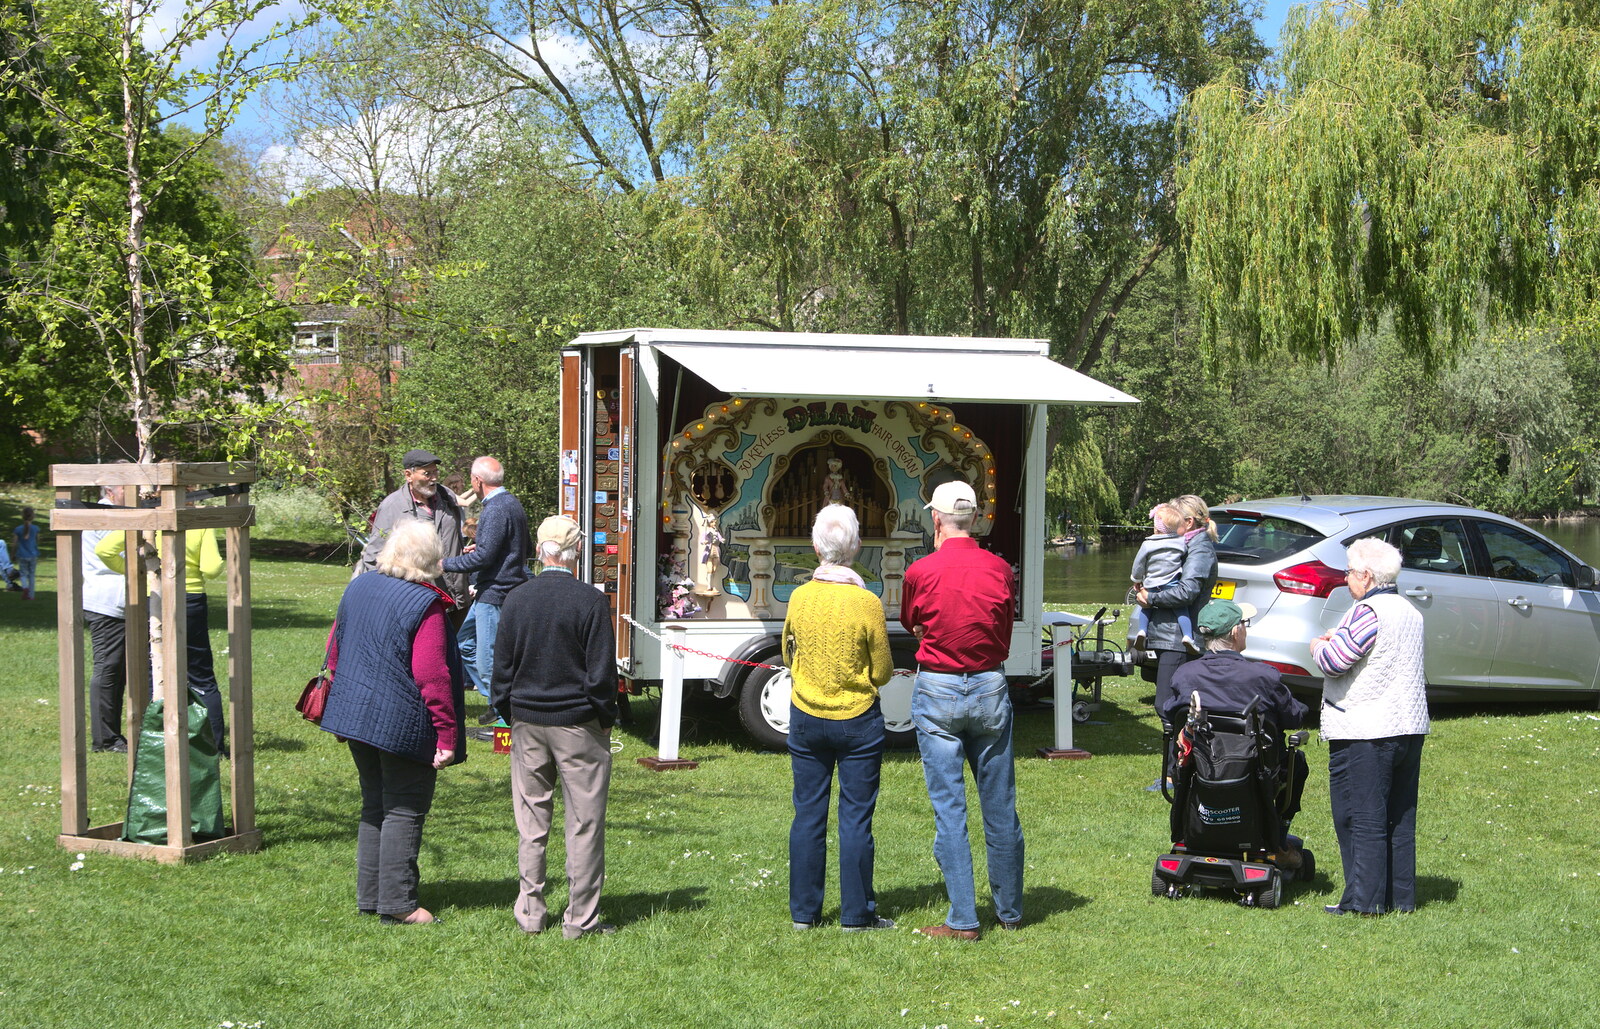 Another small organ in the park from The Diss Organ Festival, Diss, Norfolk - 14th May 2017